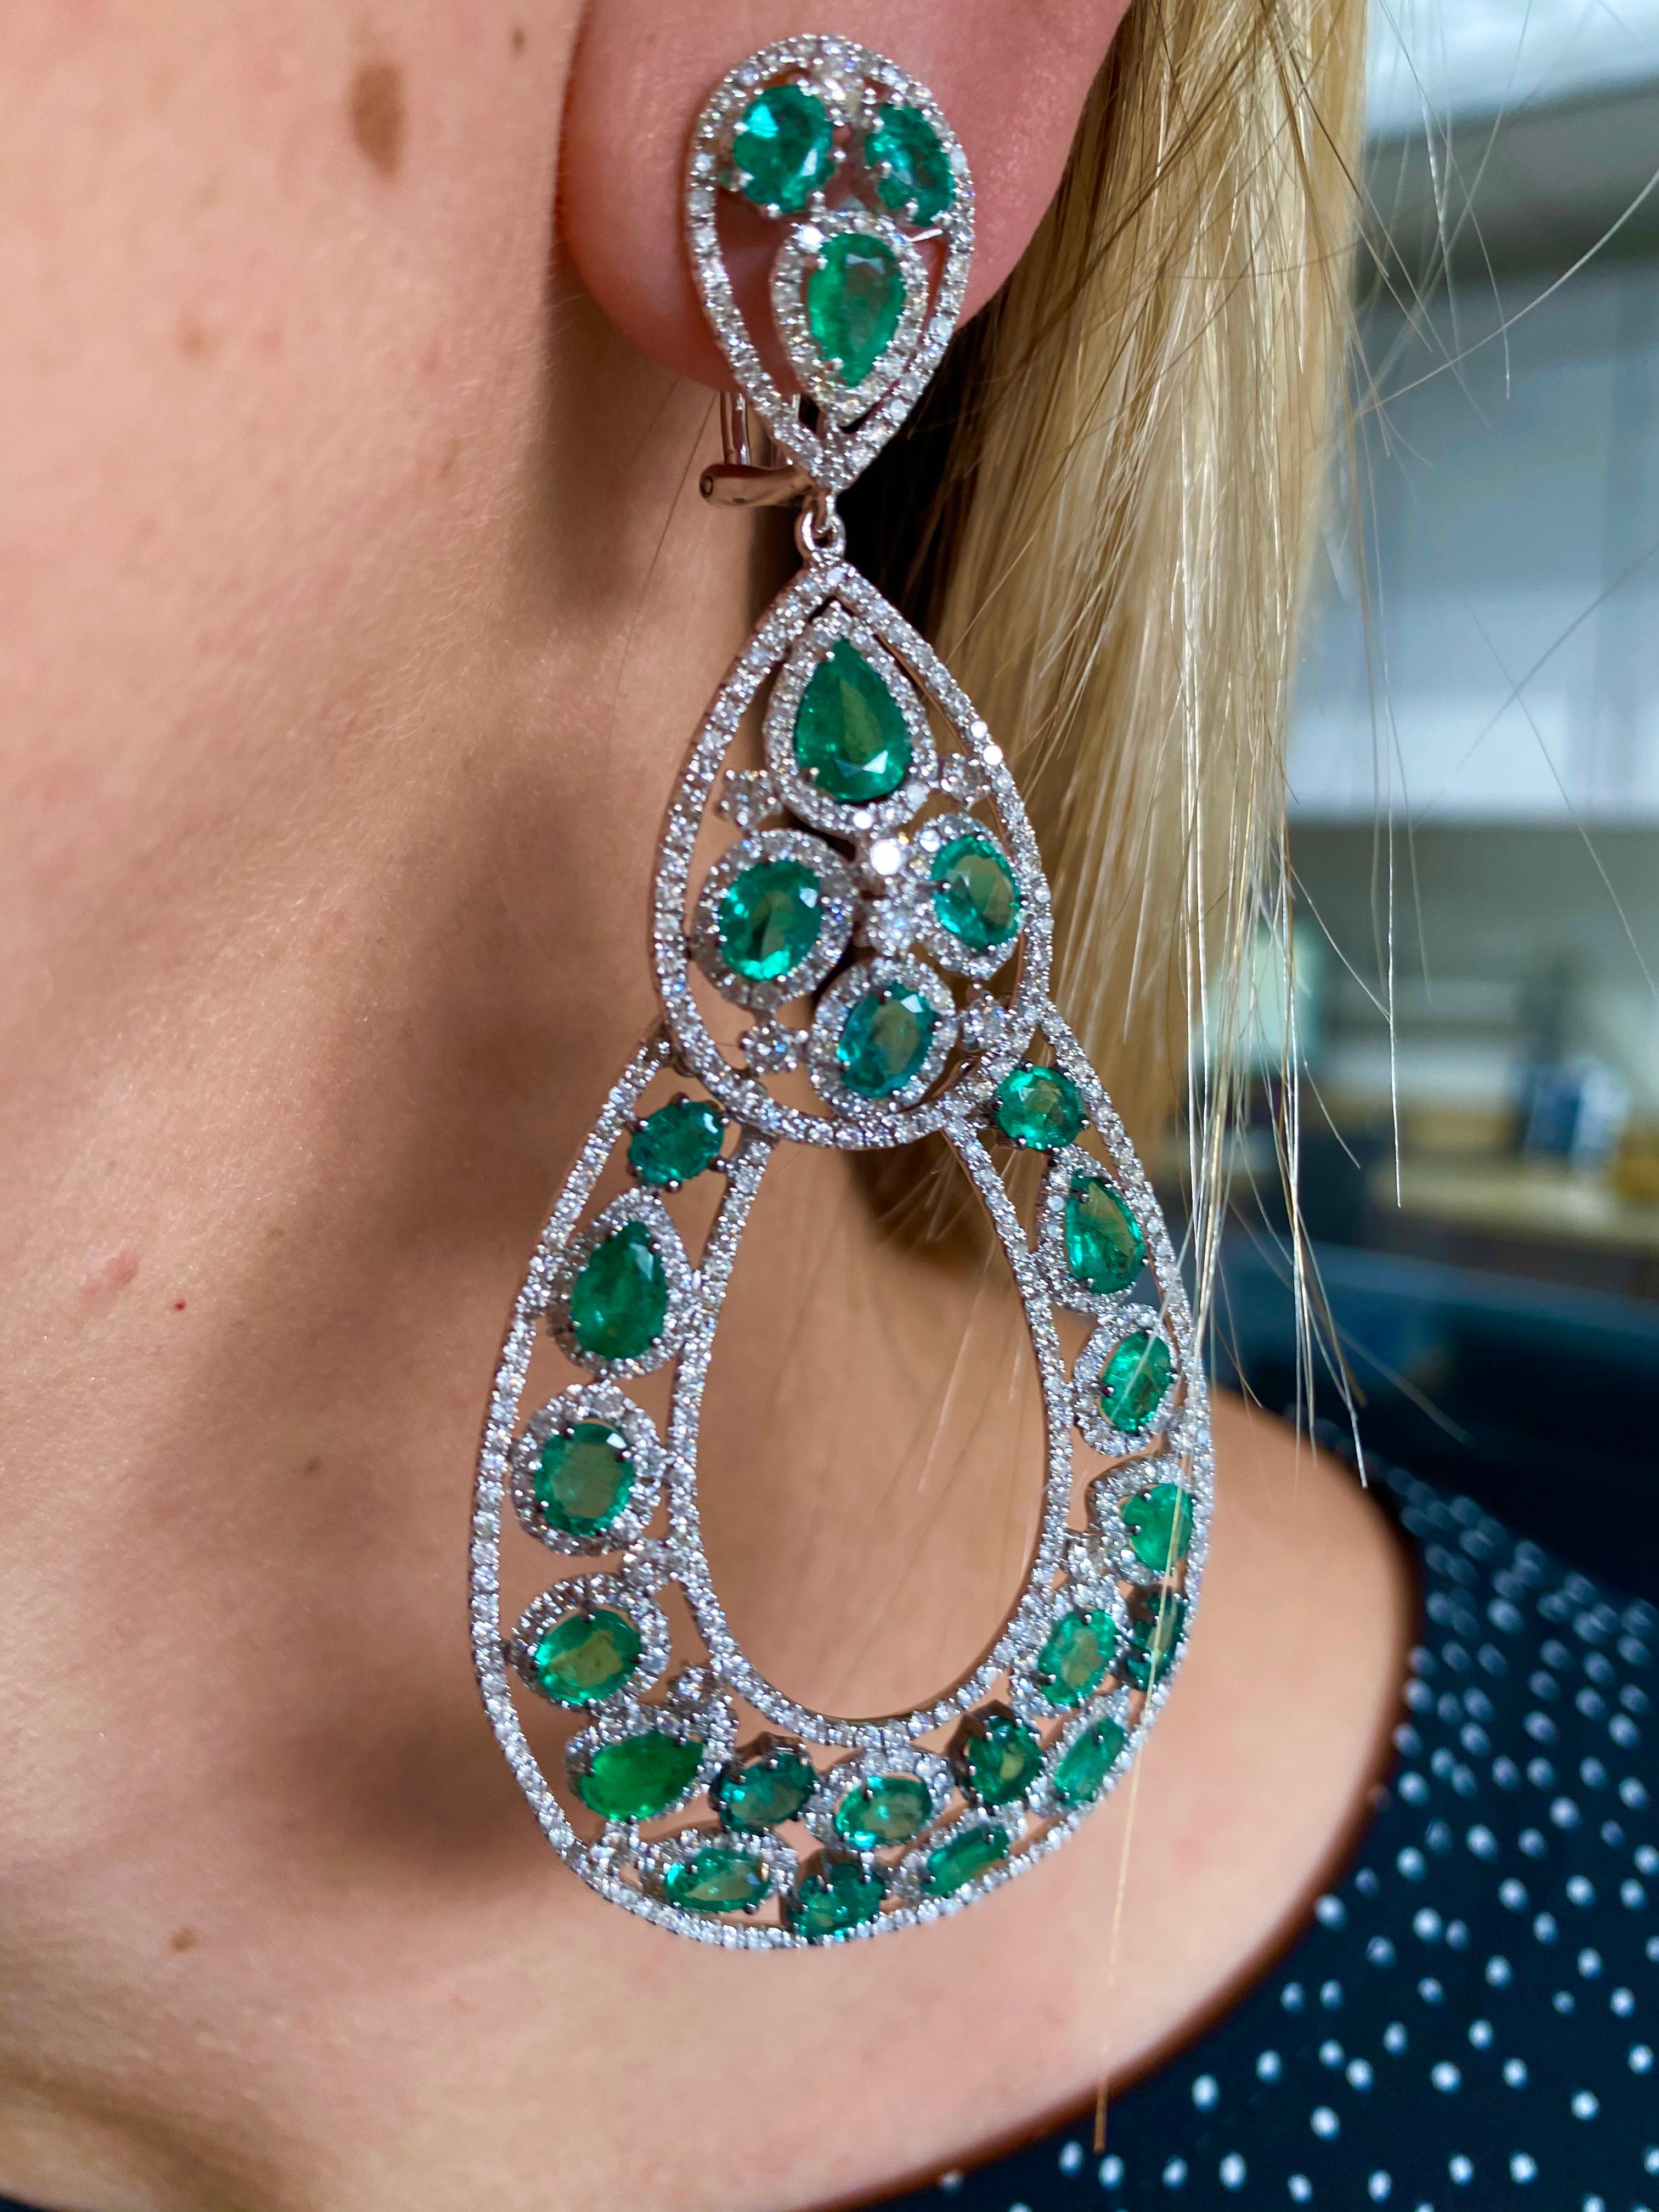 Round Cut Diana M. Stunning Emerald and Diamond Earrings by Diana M. For Sale